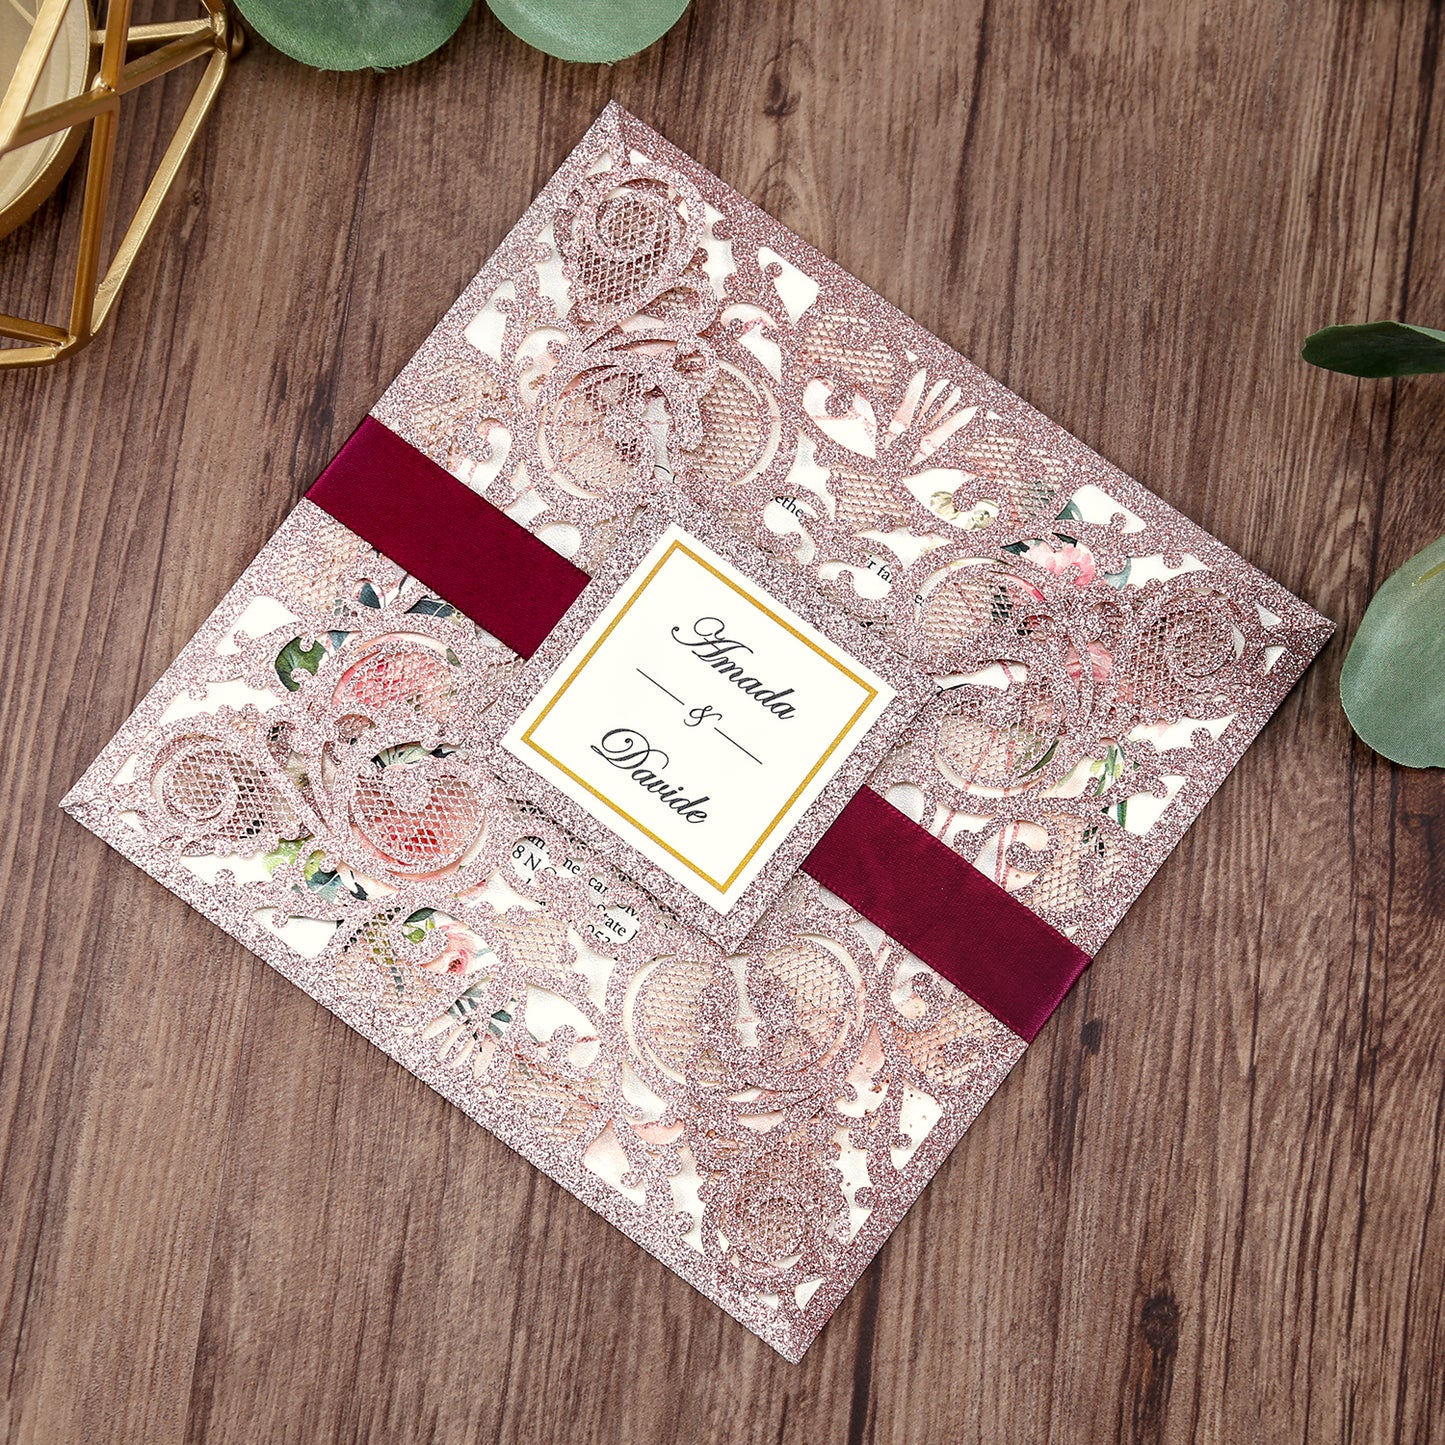 Square Rose Gold Glitter Wedding Invitations with Glitter Belly Band for Wedding - DorisHome